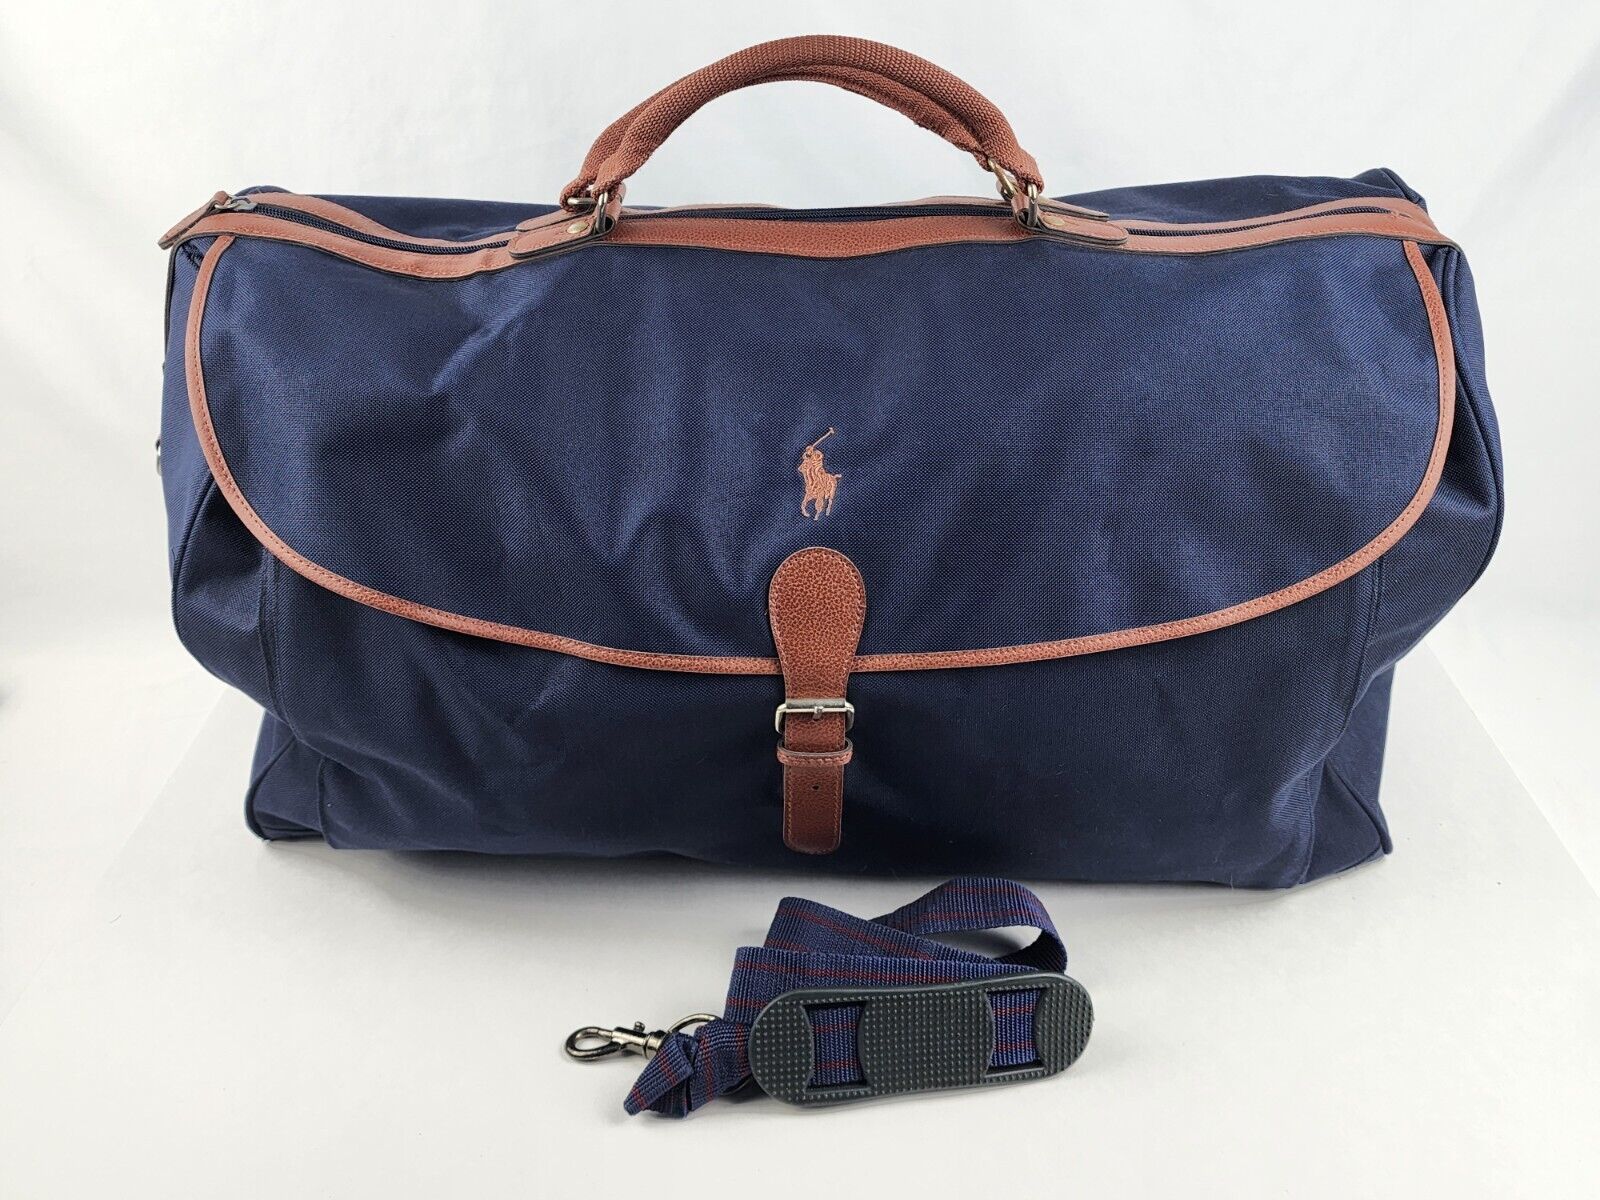 Primary image for Ralph Lauren Polo Bag Duffel Navy Blue Weekend Bag Navy Blue & Brown Gym Bag